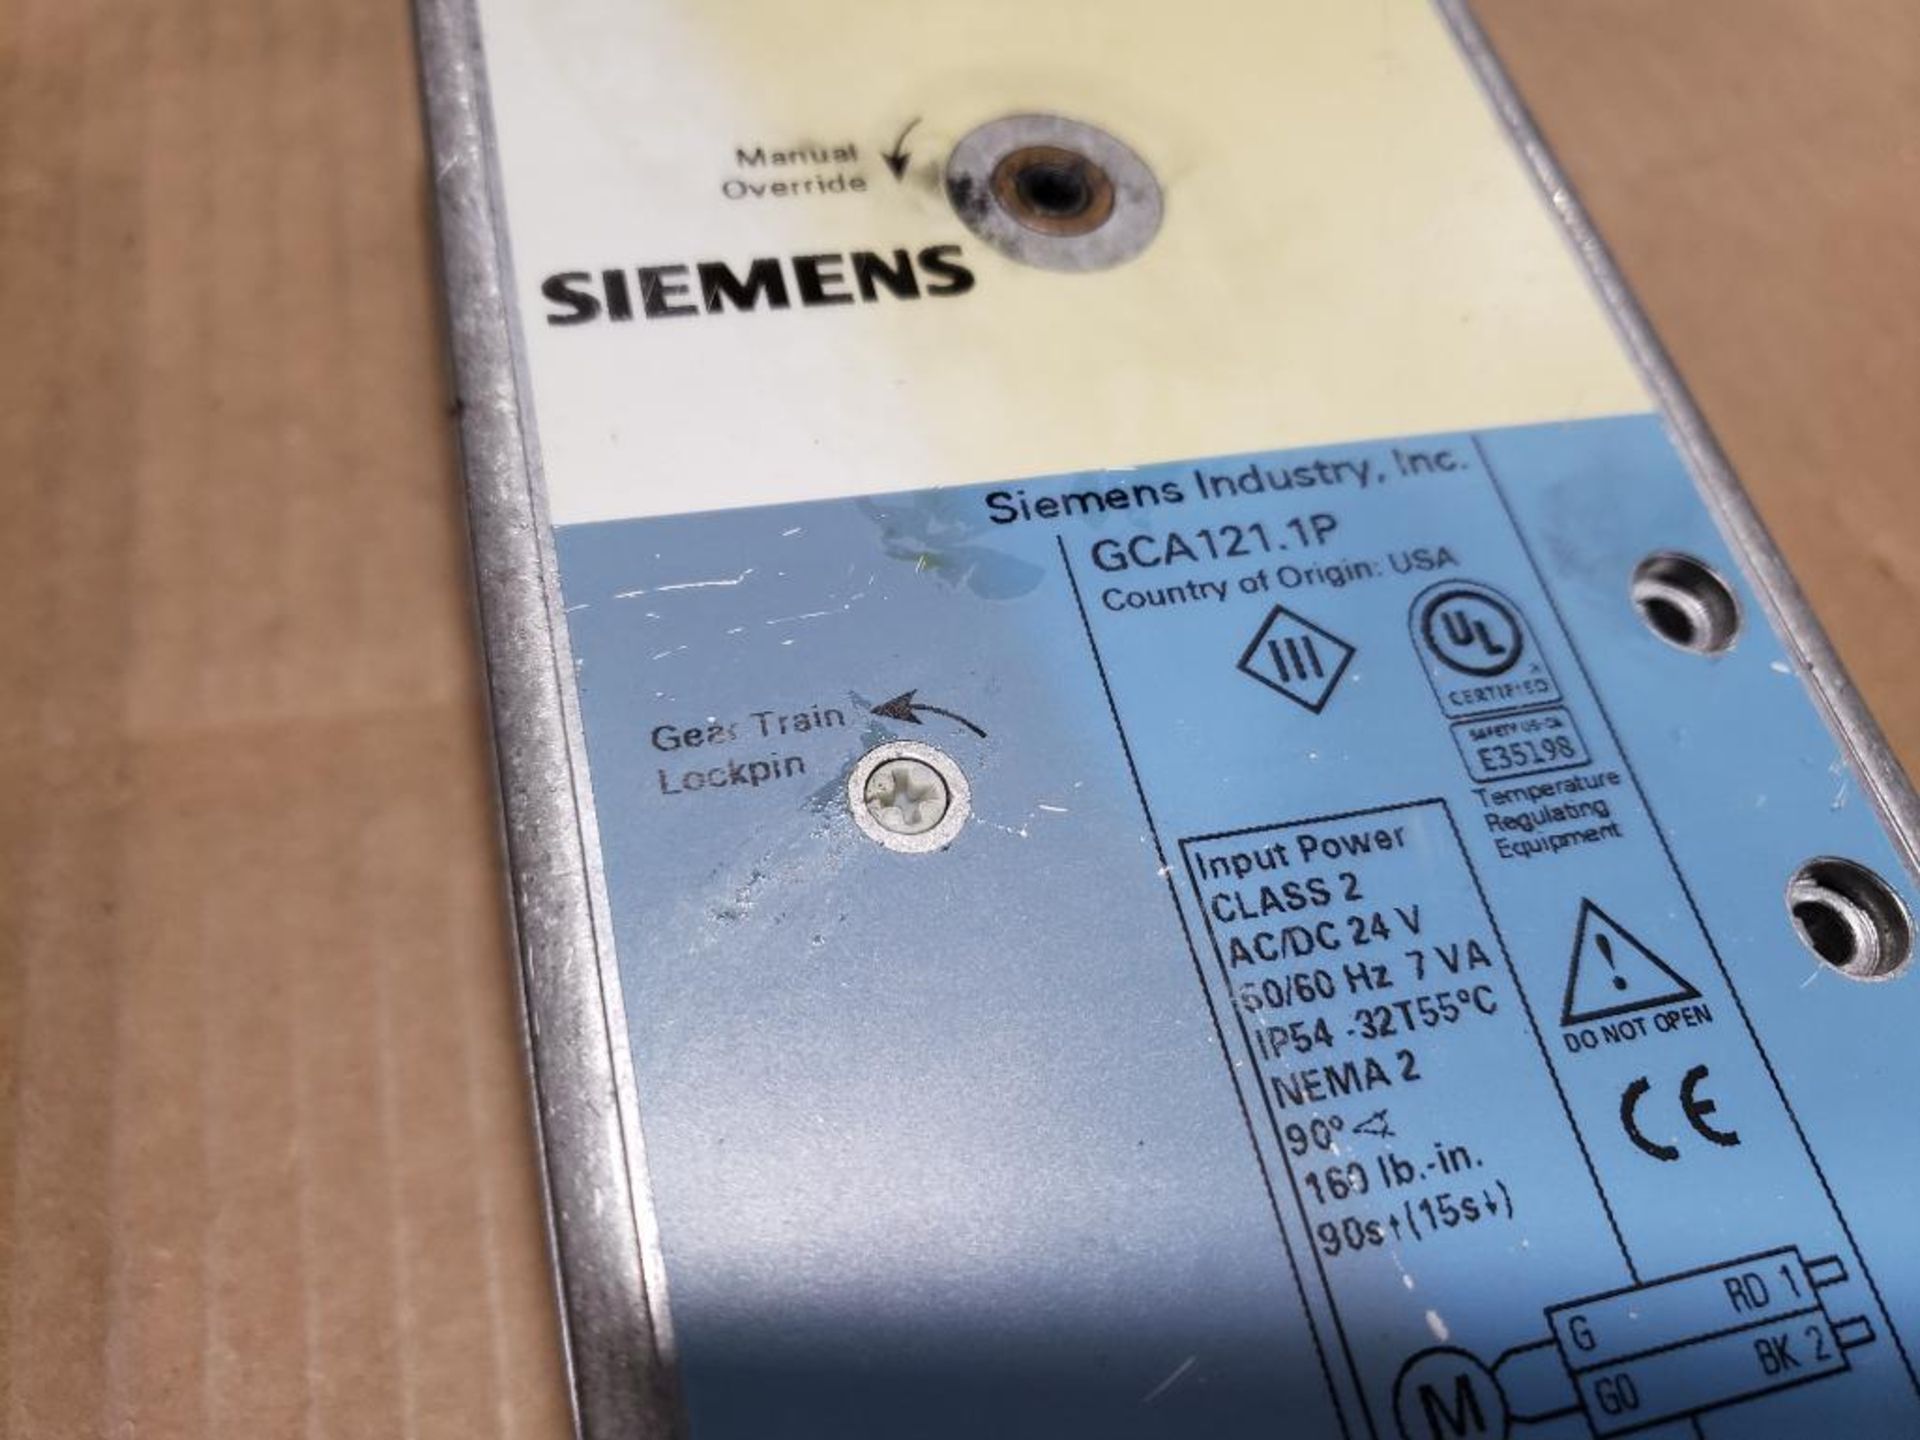 Qty 2 - Siemens actuator. Part number GCA121-1P. - Image 3 of 5